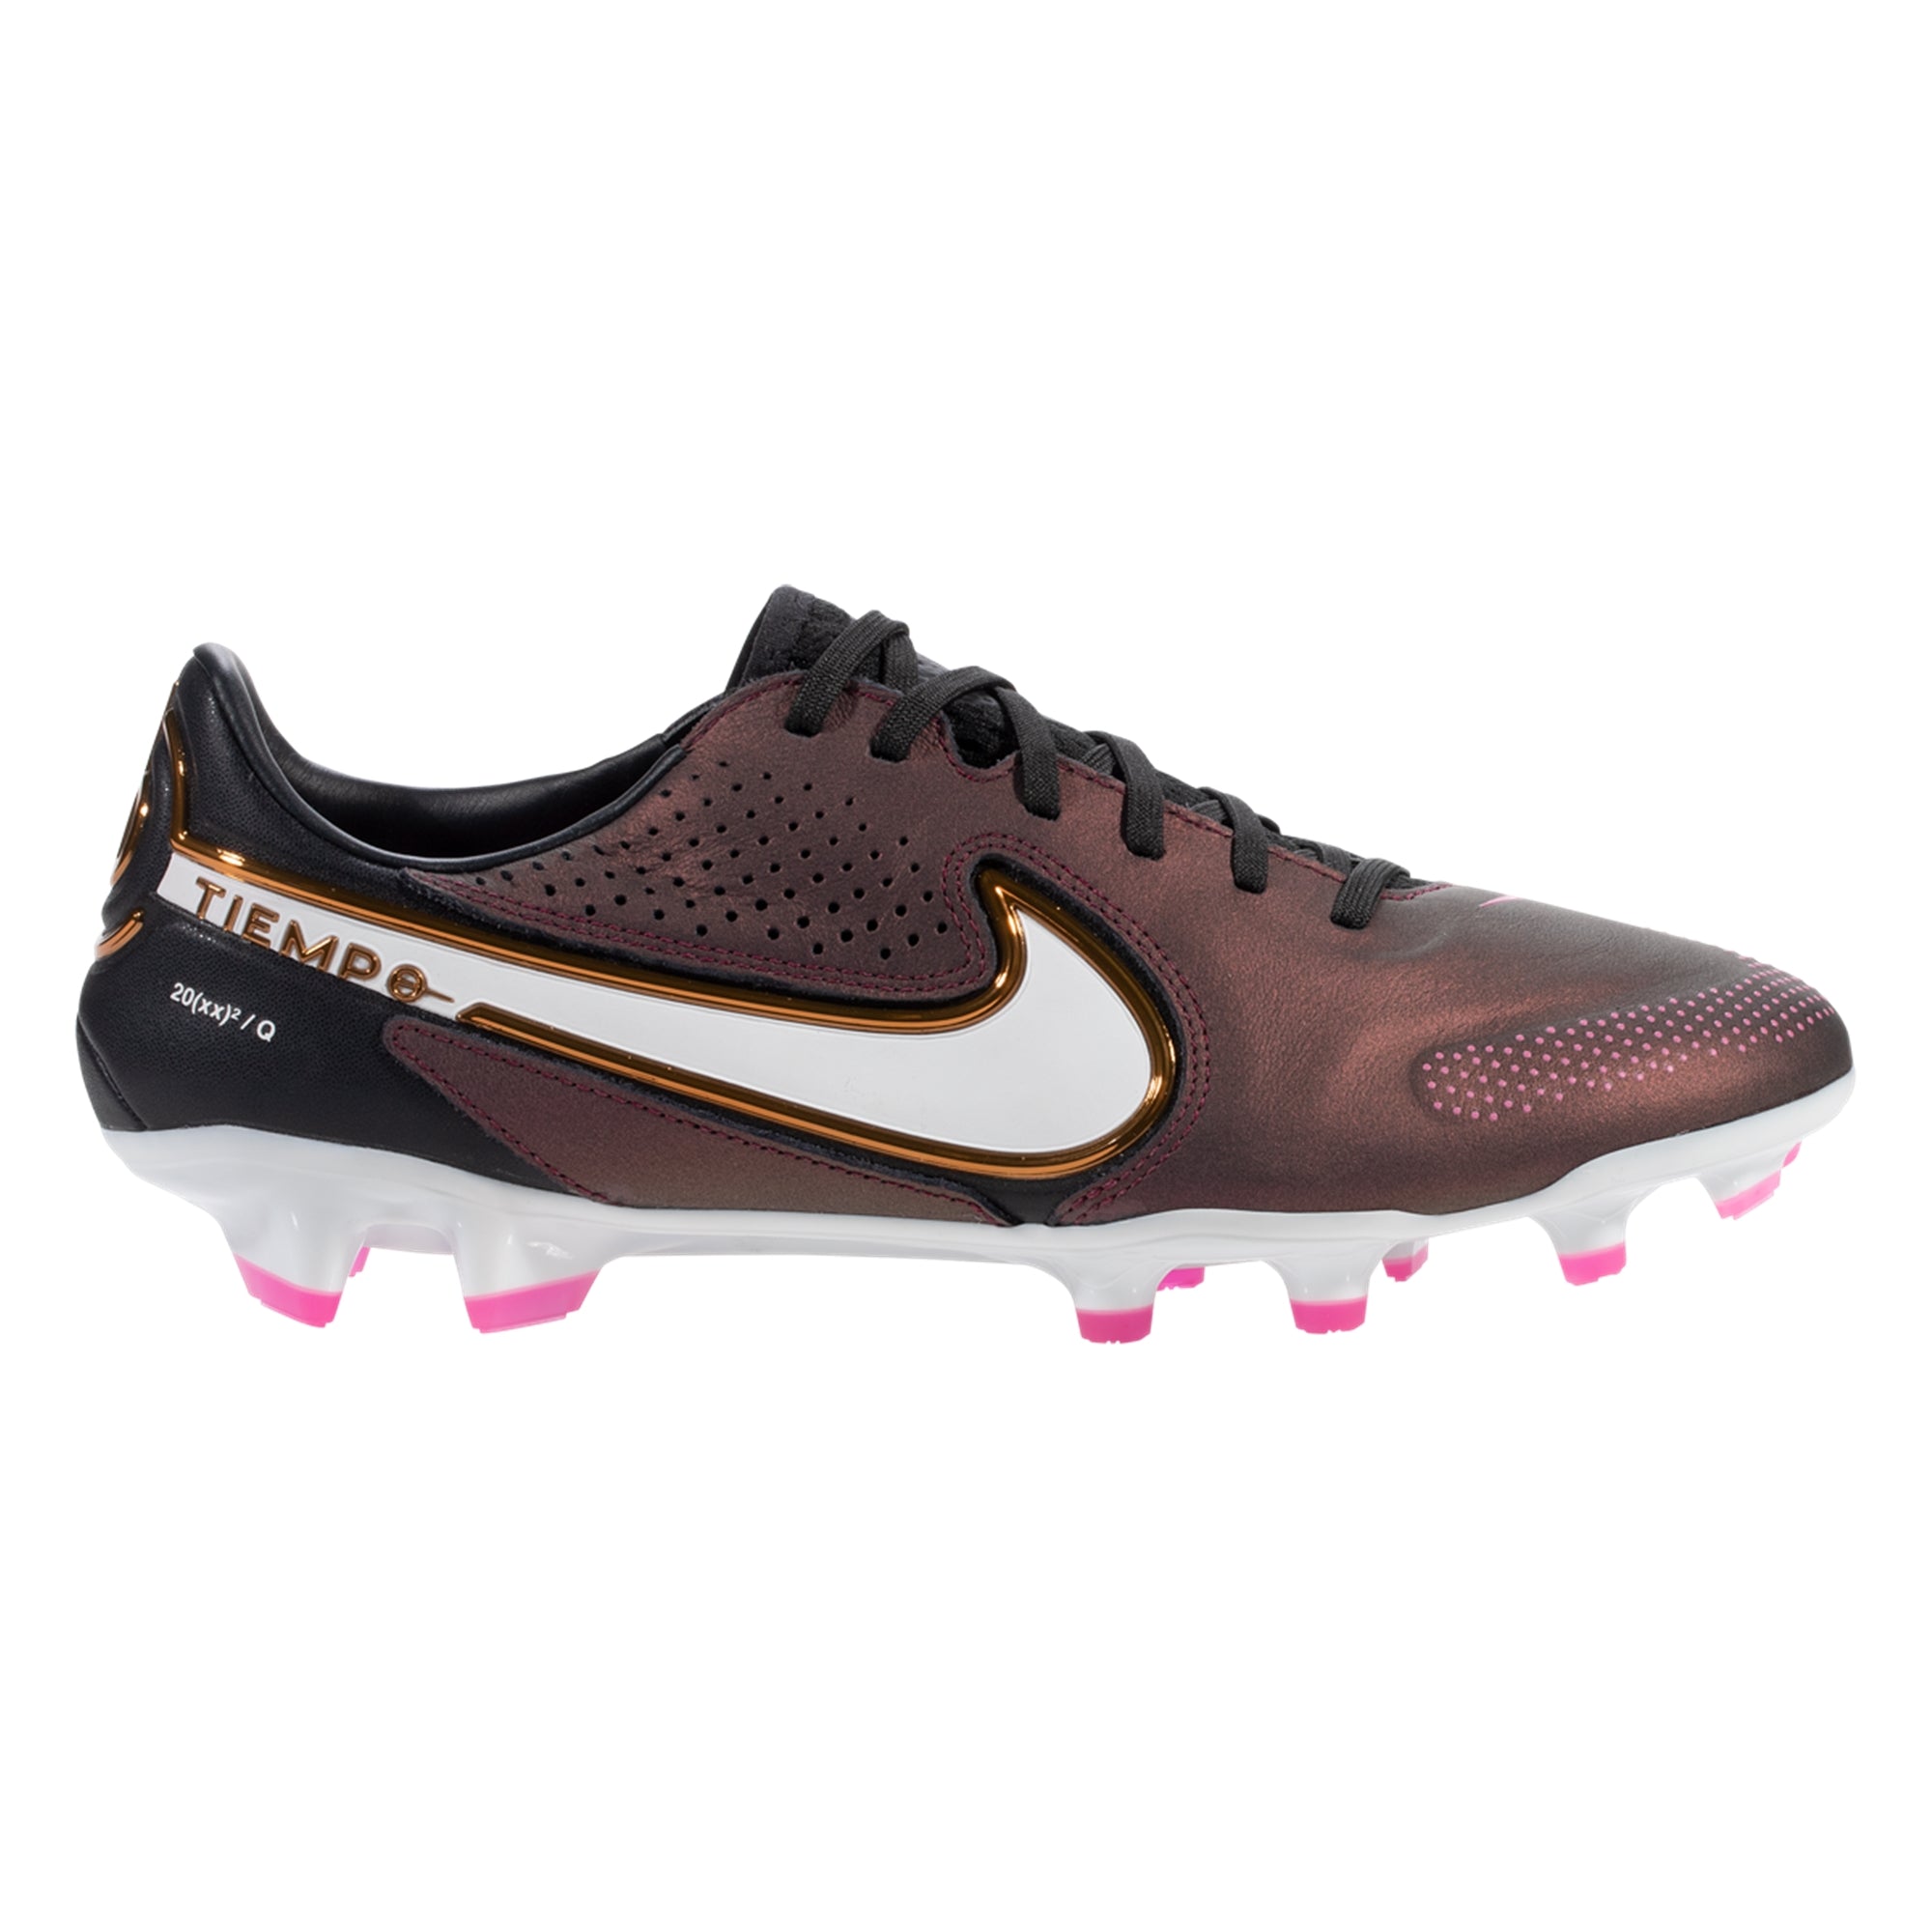 Nike Tiempo Legend 9 Pro Q FG Firm Ground Soccer Cleats - Purple/White DR5979-510 – Soccer Zone USA